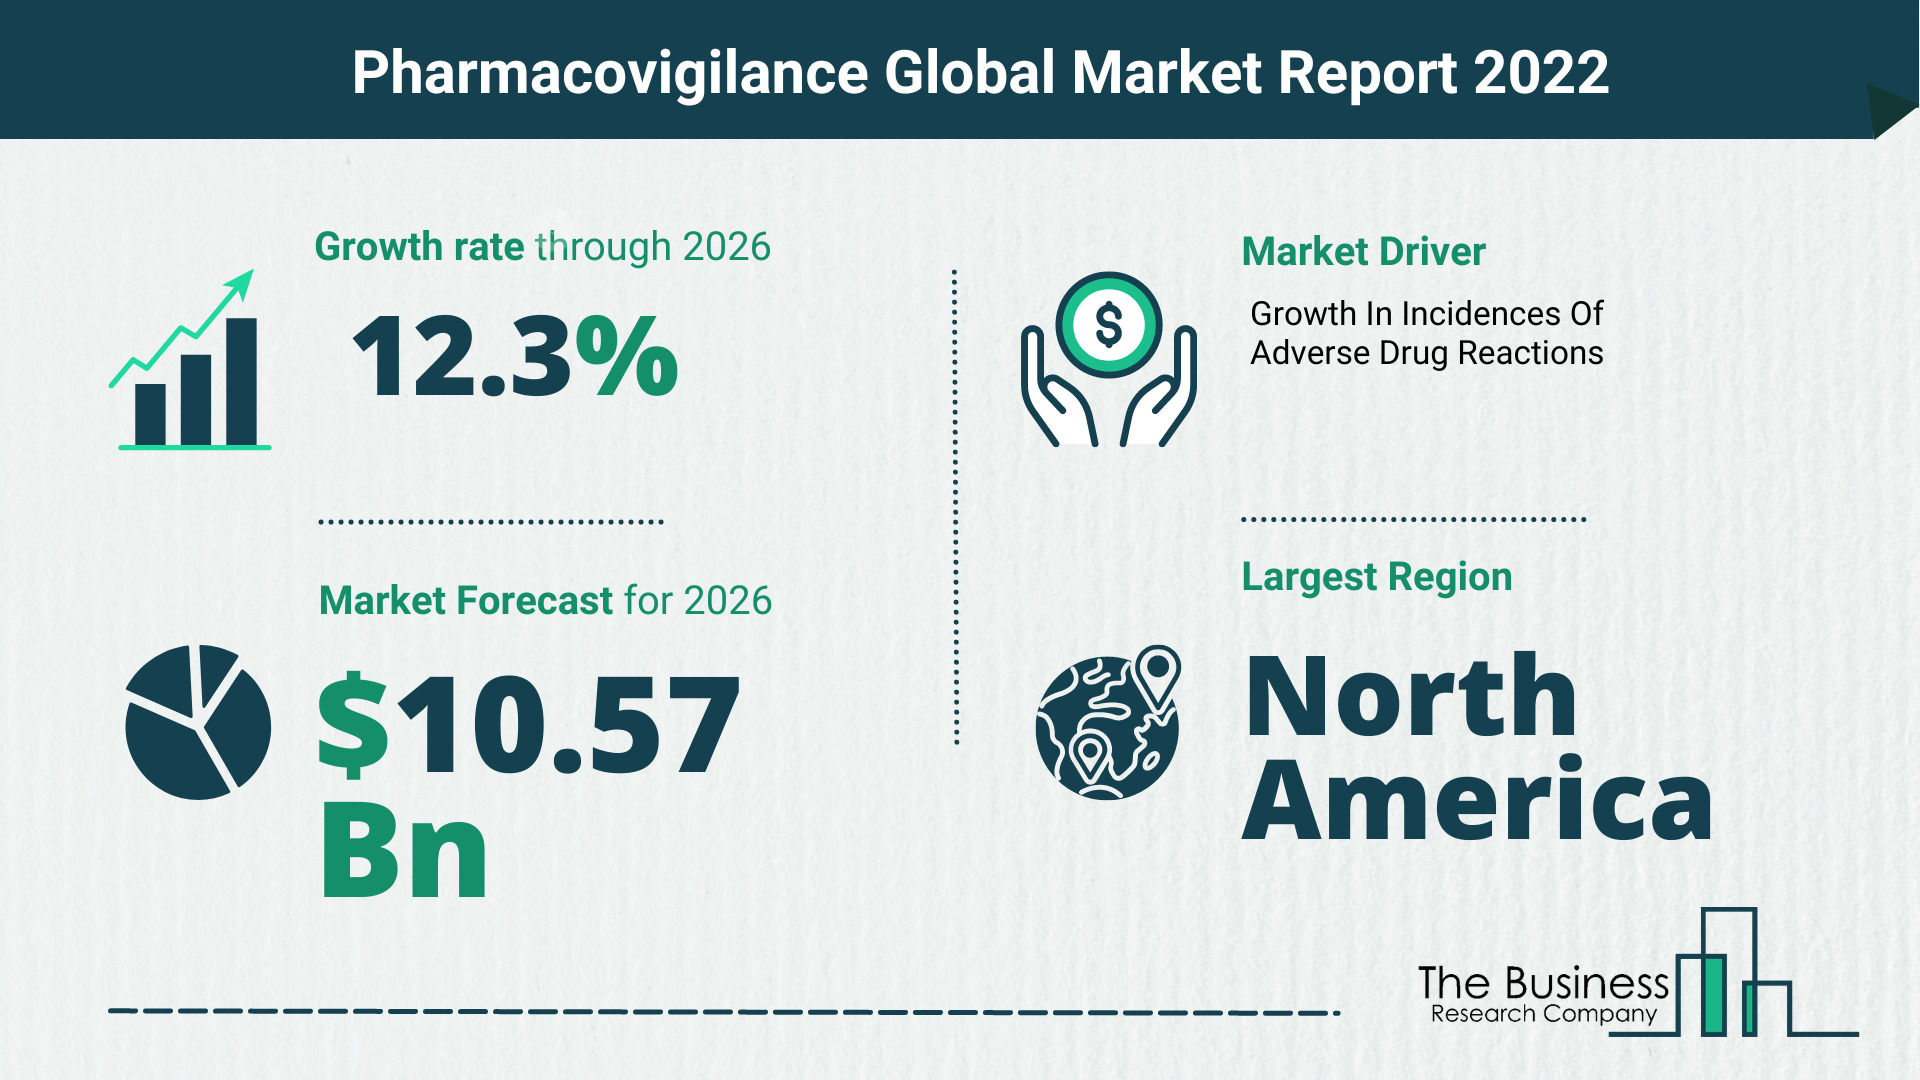 The Pharmacovigilance Market Share, Market Size, And Growth Rate 2022